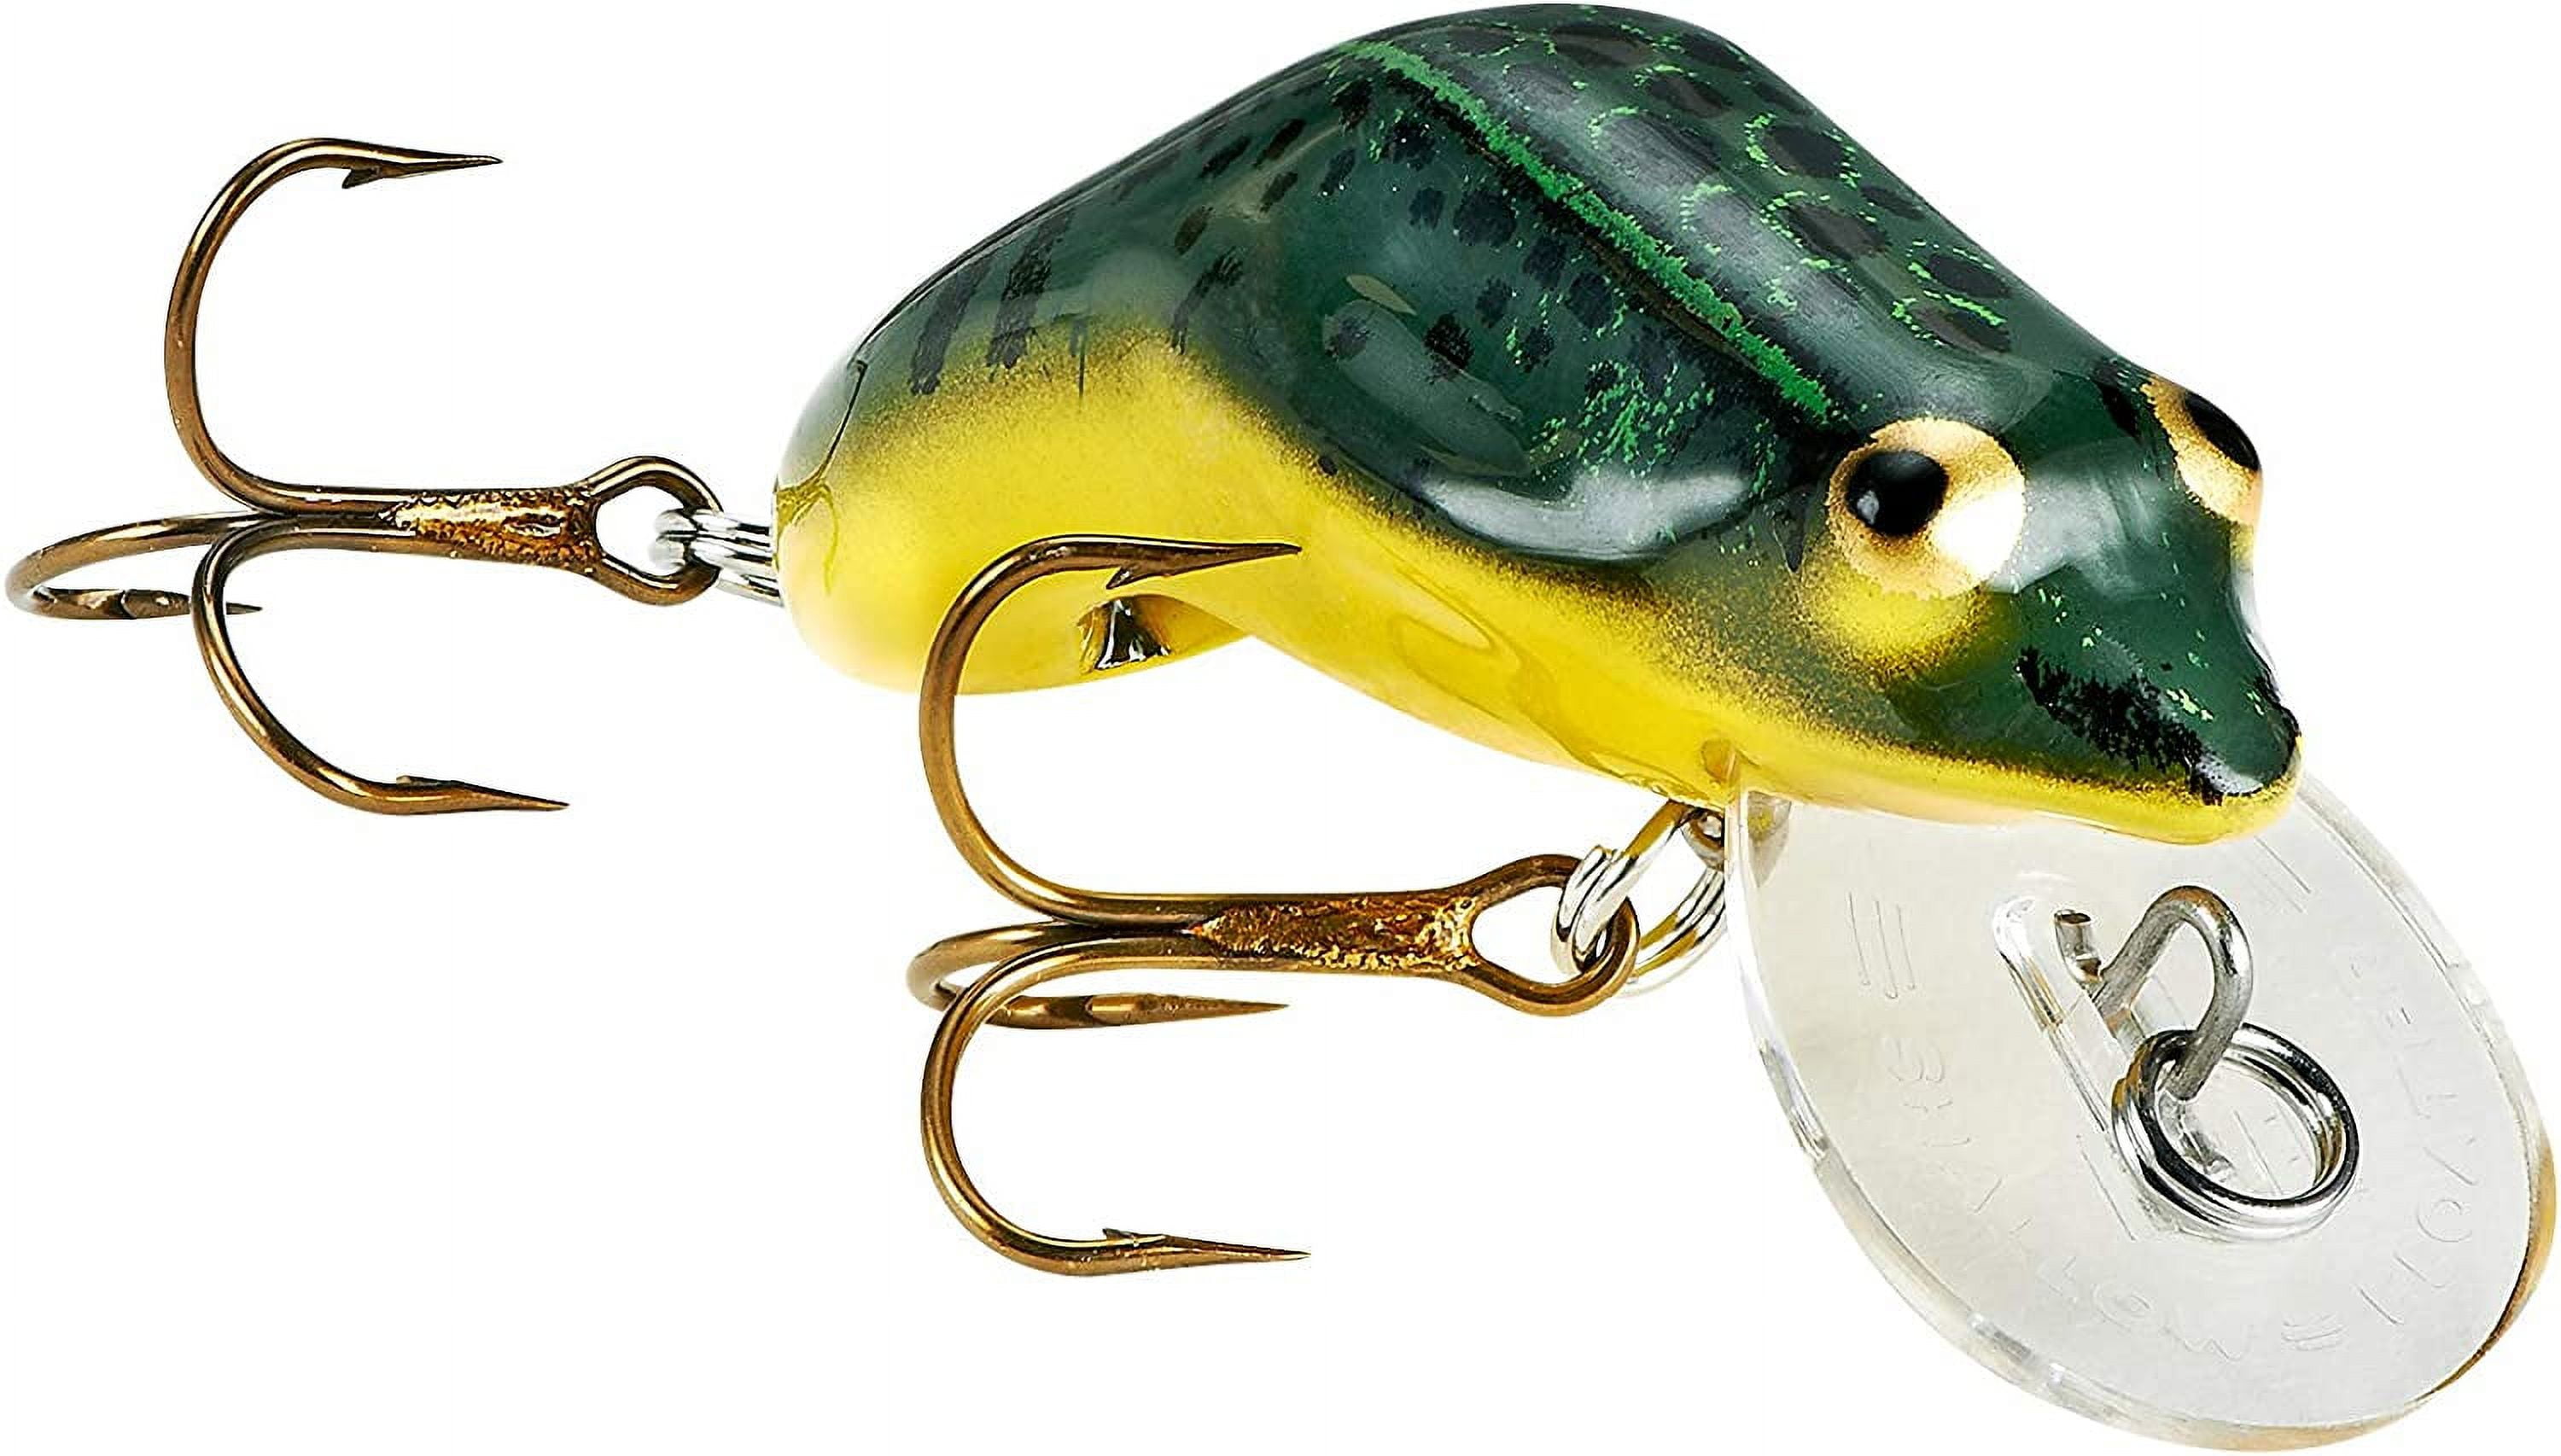 Rebel Lures Wee Frog Fishing Lure (2-Inch, Green Bull Frog) Multi-Colored